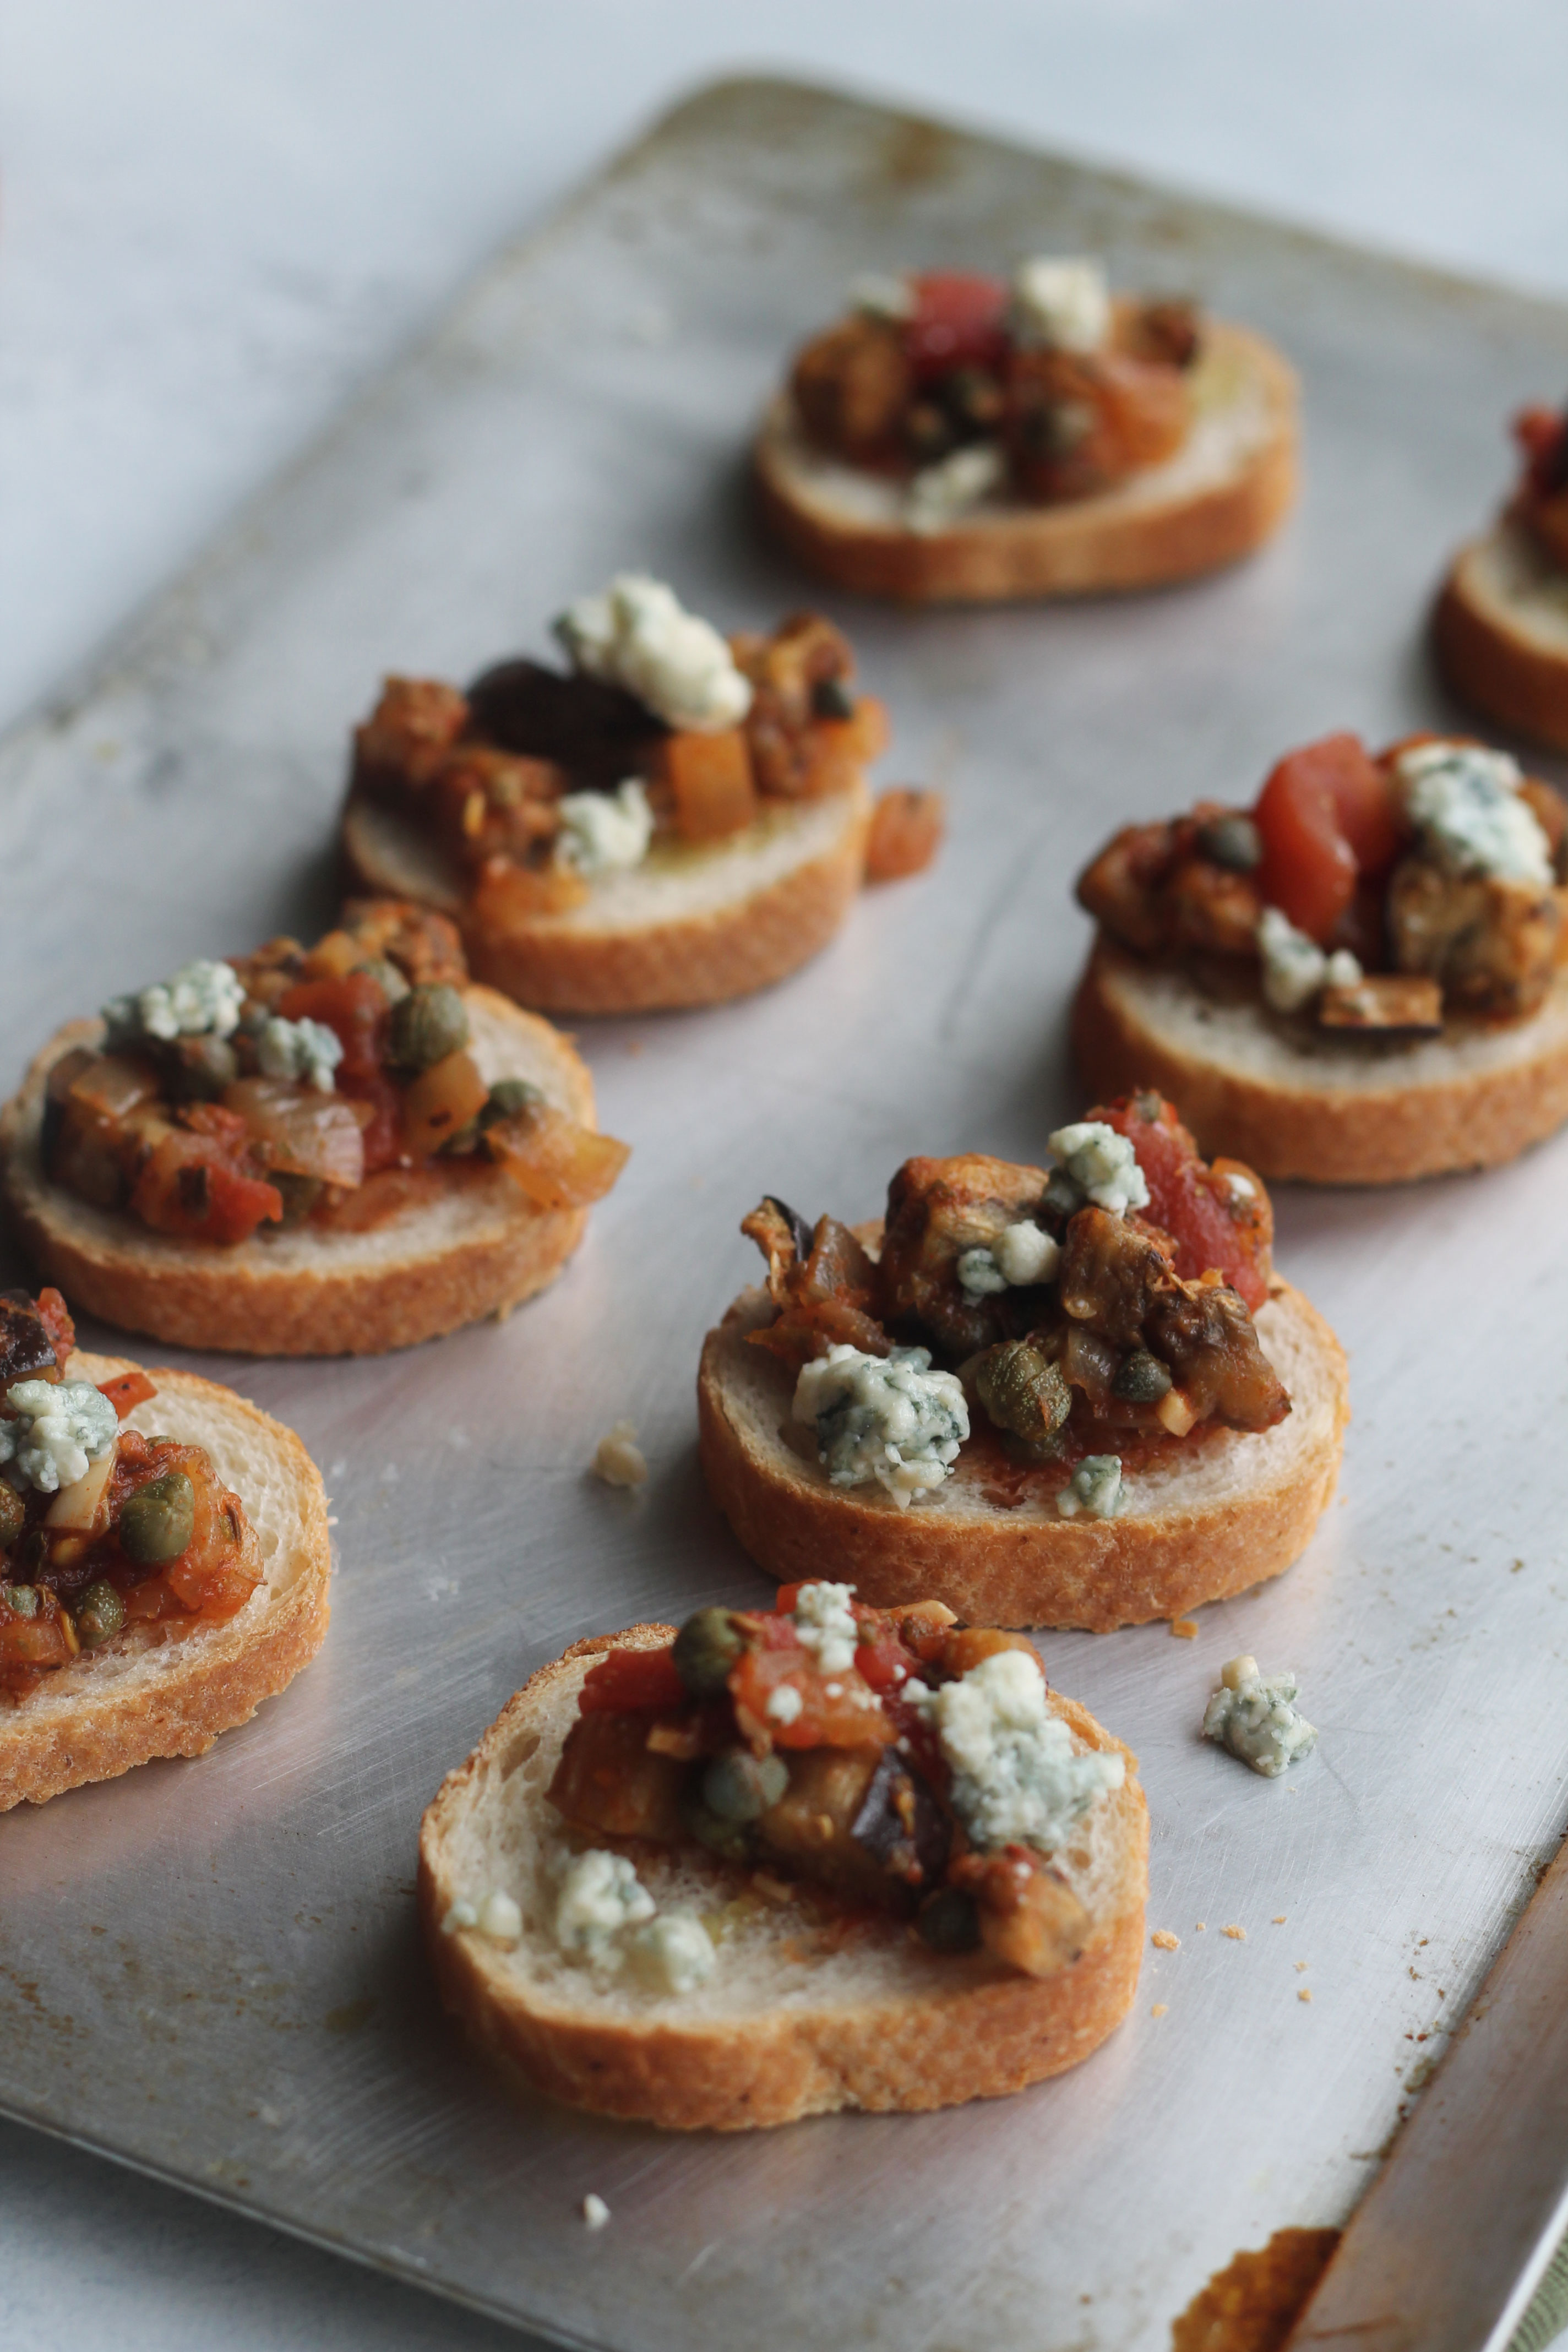 Bruschetta with eggplant, capers and blue cheese crumbles make this the perfect appetizer